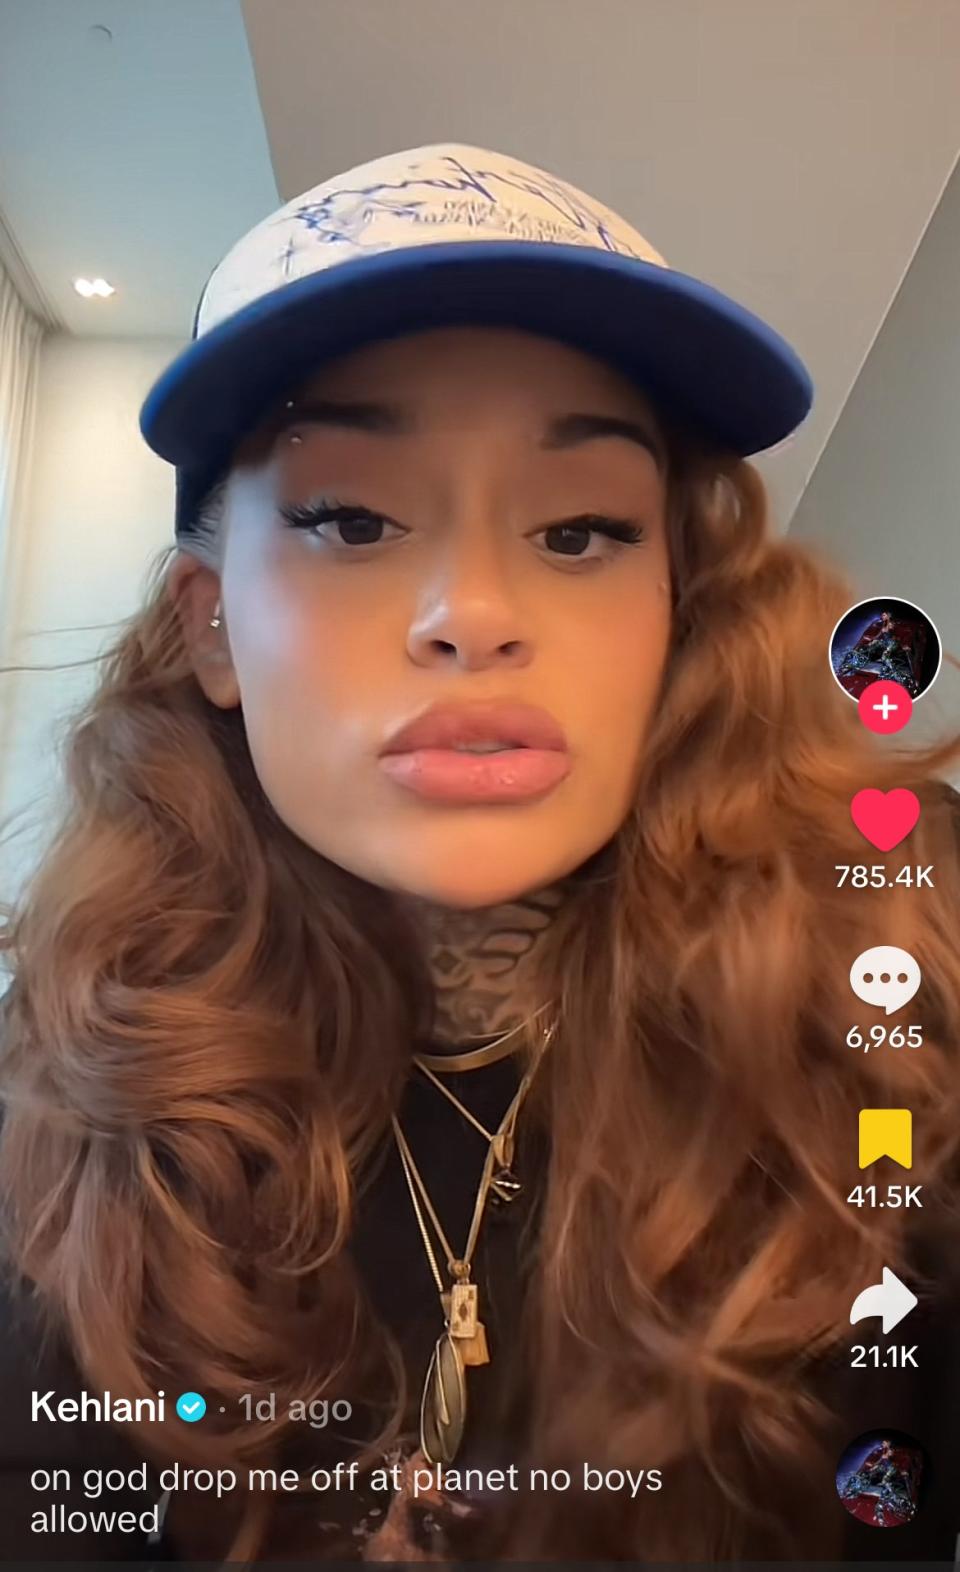 Singer Kehlani wearing a blue and white cap, seen in a TikTok video with the caption, "on god drop me off at planet no boys allowed." The video has 785.4K likes